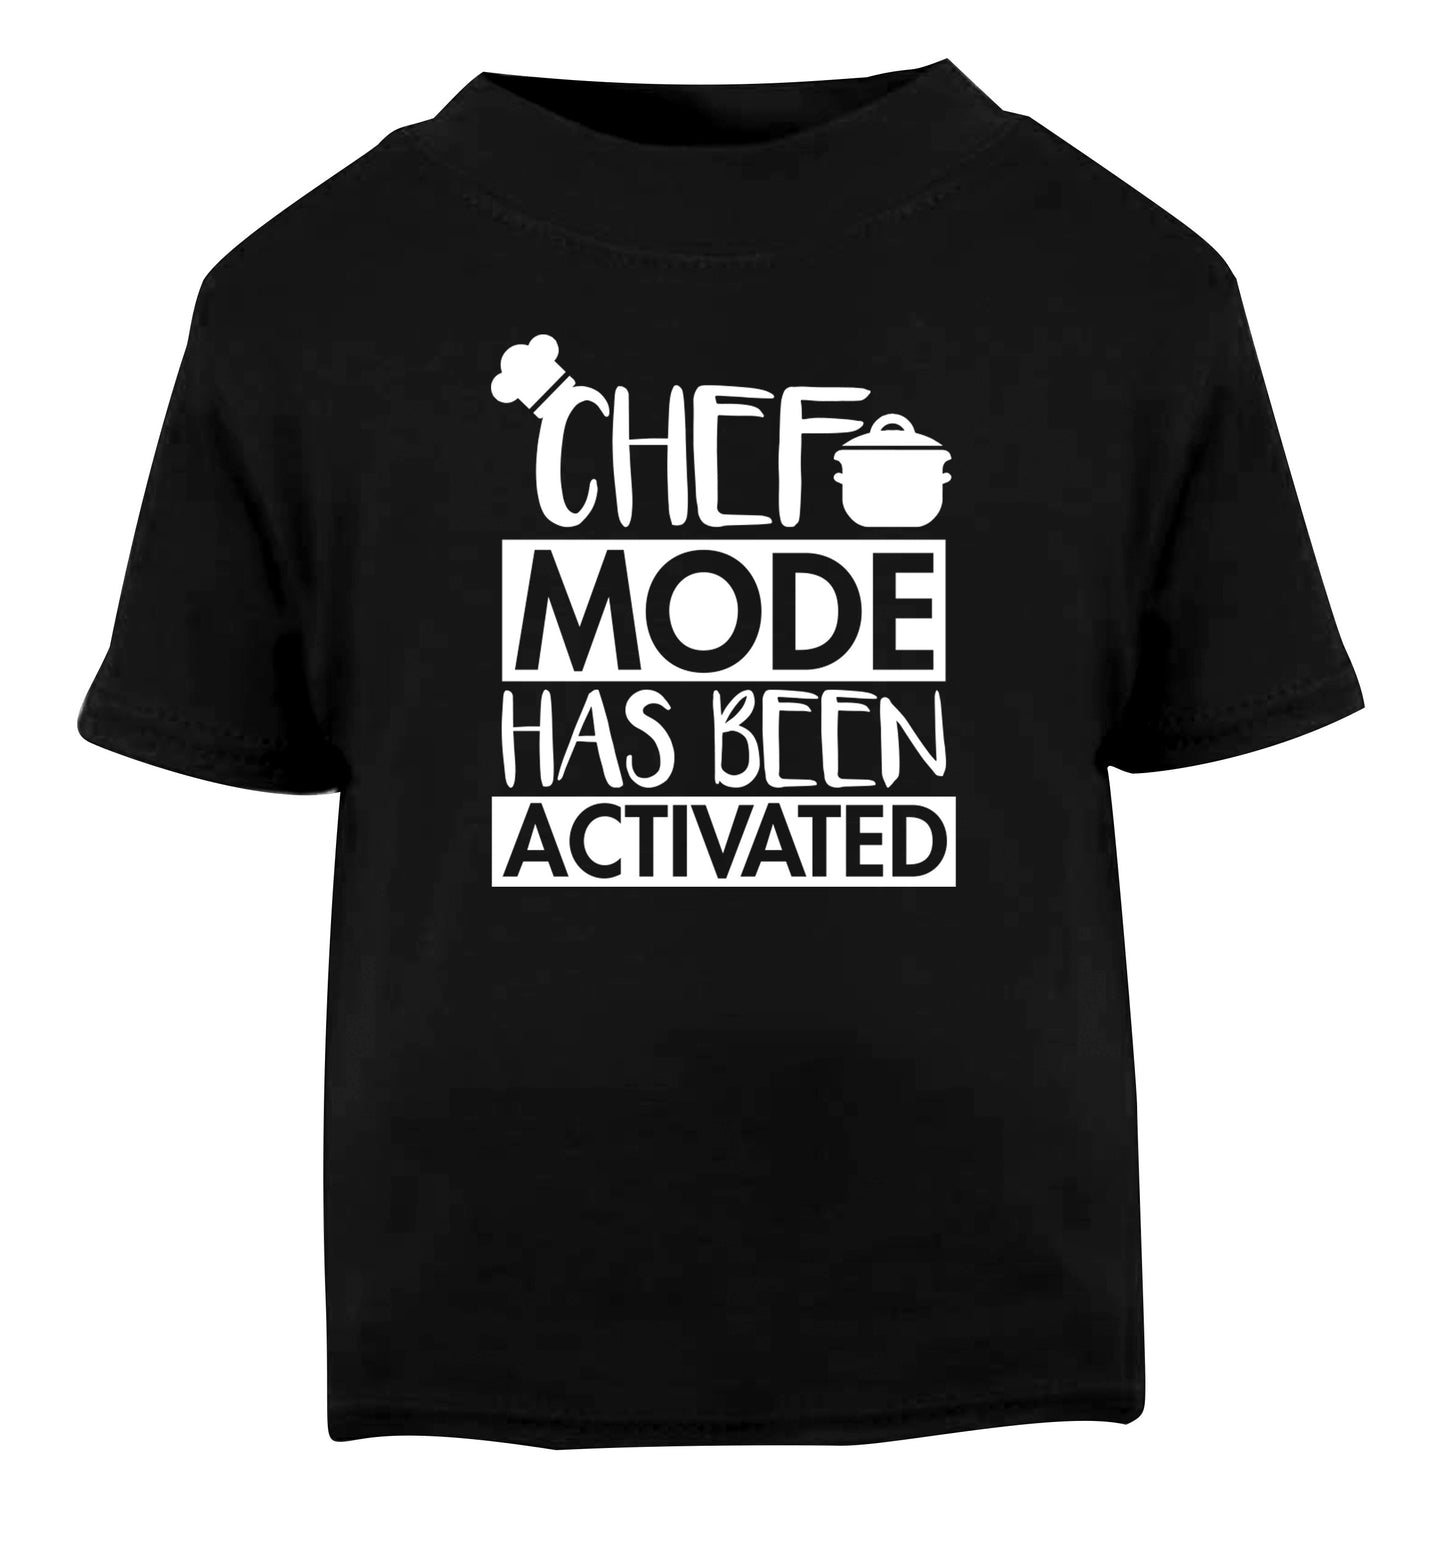 Chef mode has been activated Black Baby Toddler Tshirt 2 years